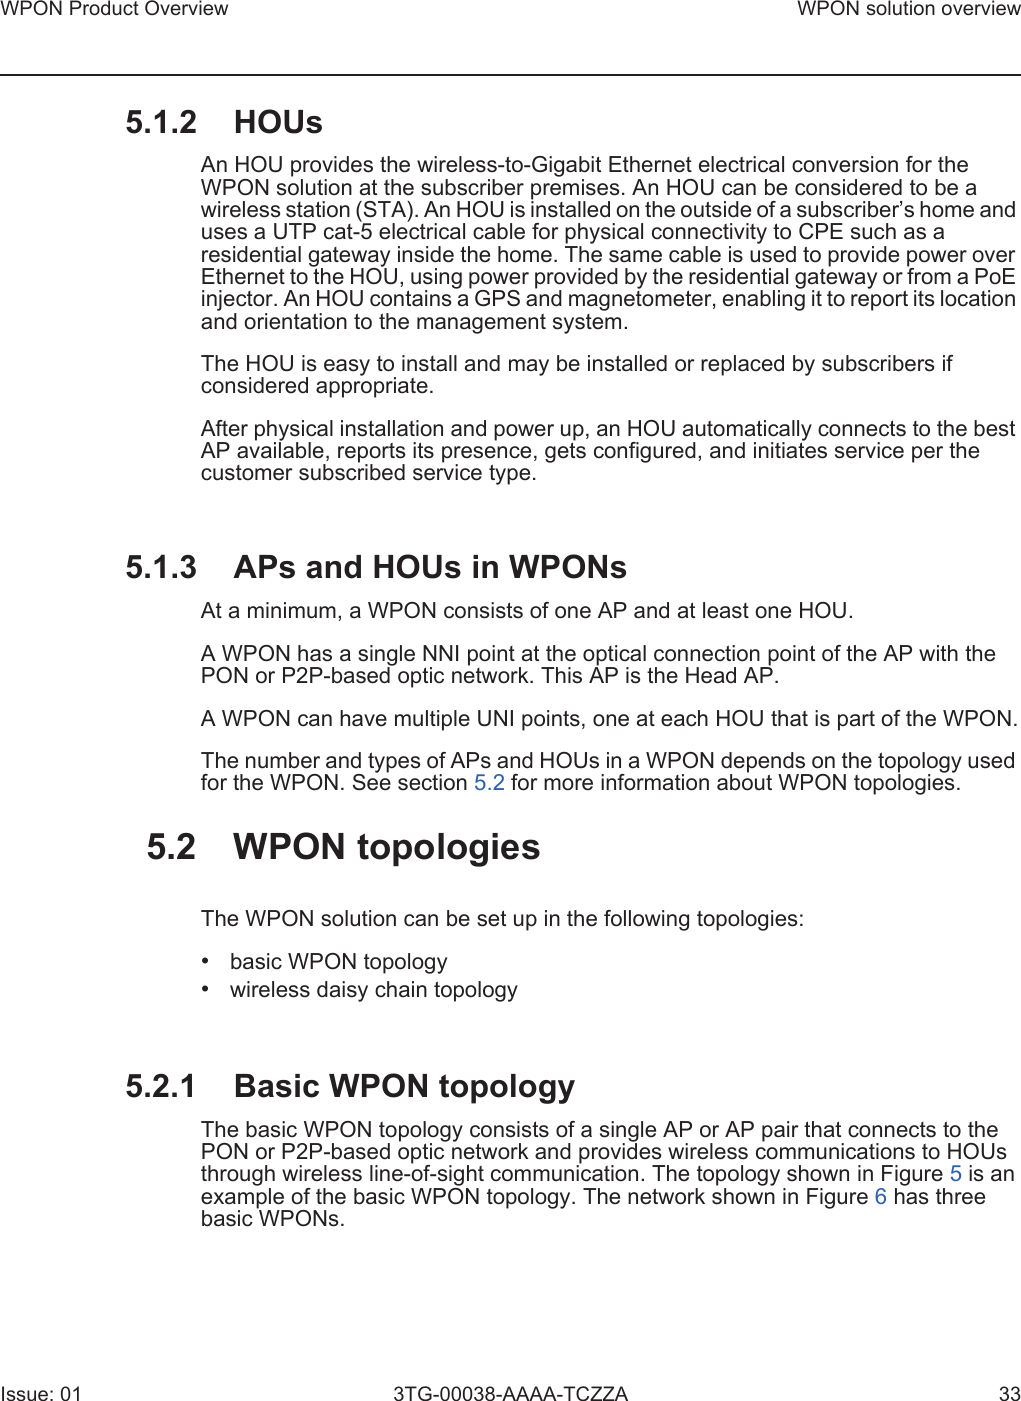 WPON Product Overview WPON solution overviewIssue: 01 3TG-00038-AAAA-TCZZA 335.1.2 HOUsAn HOU provides the wireless-to-Gigabit Ethernet electrical conversion for the WPON solution at the subscriber premises. An HOU can be considered to be a wireless station (STA). An HOU is installed on the outside of a subscriber’s home and uses a UTP cat-5 electrical cable for physical connectivity to CPE such as a residential gateway inside the home. The same cable is used to provide power over Ethernet to the HOU, using power provided by the residential gateway or from a PoE injector. An HOU contains a GPS and magnetometer, enabling it to report its location and orientation to the management system.The HOU is easy to install and may be installed or replaced by subscribers if considered appropriate. After physical installation and power up, an HOU automatically connects to the best AP available, reports its presence, gets configured, and initiates service per the customer subscribed service type.5.1.3 APs and HOUs in WPONsAt a minimum, a WPON consists of one AP and at least one HOU.A WPON has a single NNI point at the optical connection point of the AP with the PON or P2P-based optic network. This AP is the Head AP.A WPON can have multiple UNI points, one at each HOU that is part of the WPON.The number and types of APs and HOUs in a WPON depends on the topology used for the WPON. See section 5.2 for more information about WPON topologies.5.2 WPON topologiesThe WPON solution can be set up in the following topologies:•basic WPON topology•wireless daisy chain topology5.2.1 Basic WPON topologyThe basic WPON topology consists of a single AP or AP pair that connects to the PON or P2P-based optic network and provides wireless communications to HOUs through wireless line-of-sight communication. The topology shown in Figure 5 is an example of the basic WPON topology. The network shown in Figure 6 has three basic WPONs.